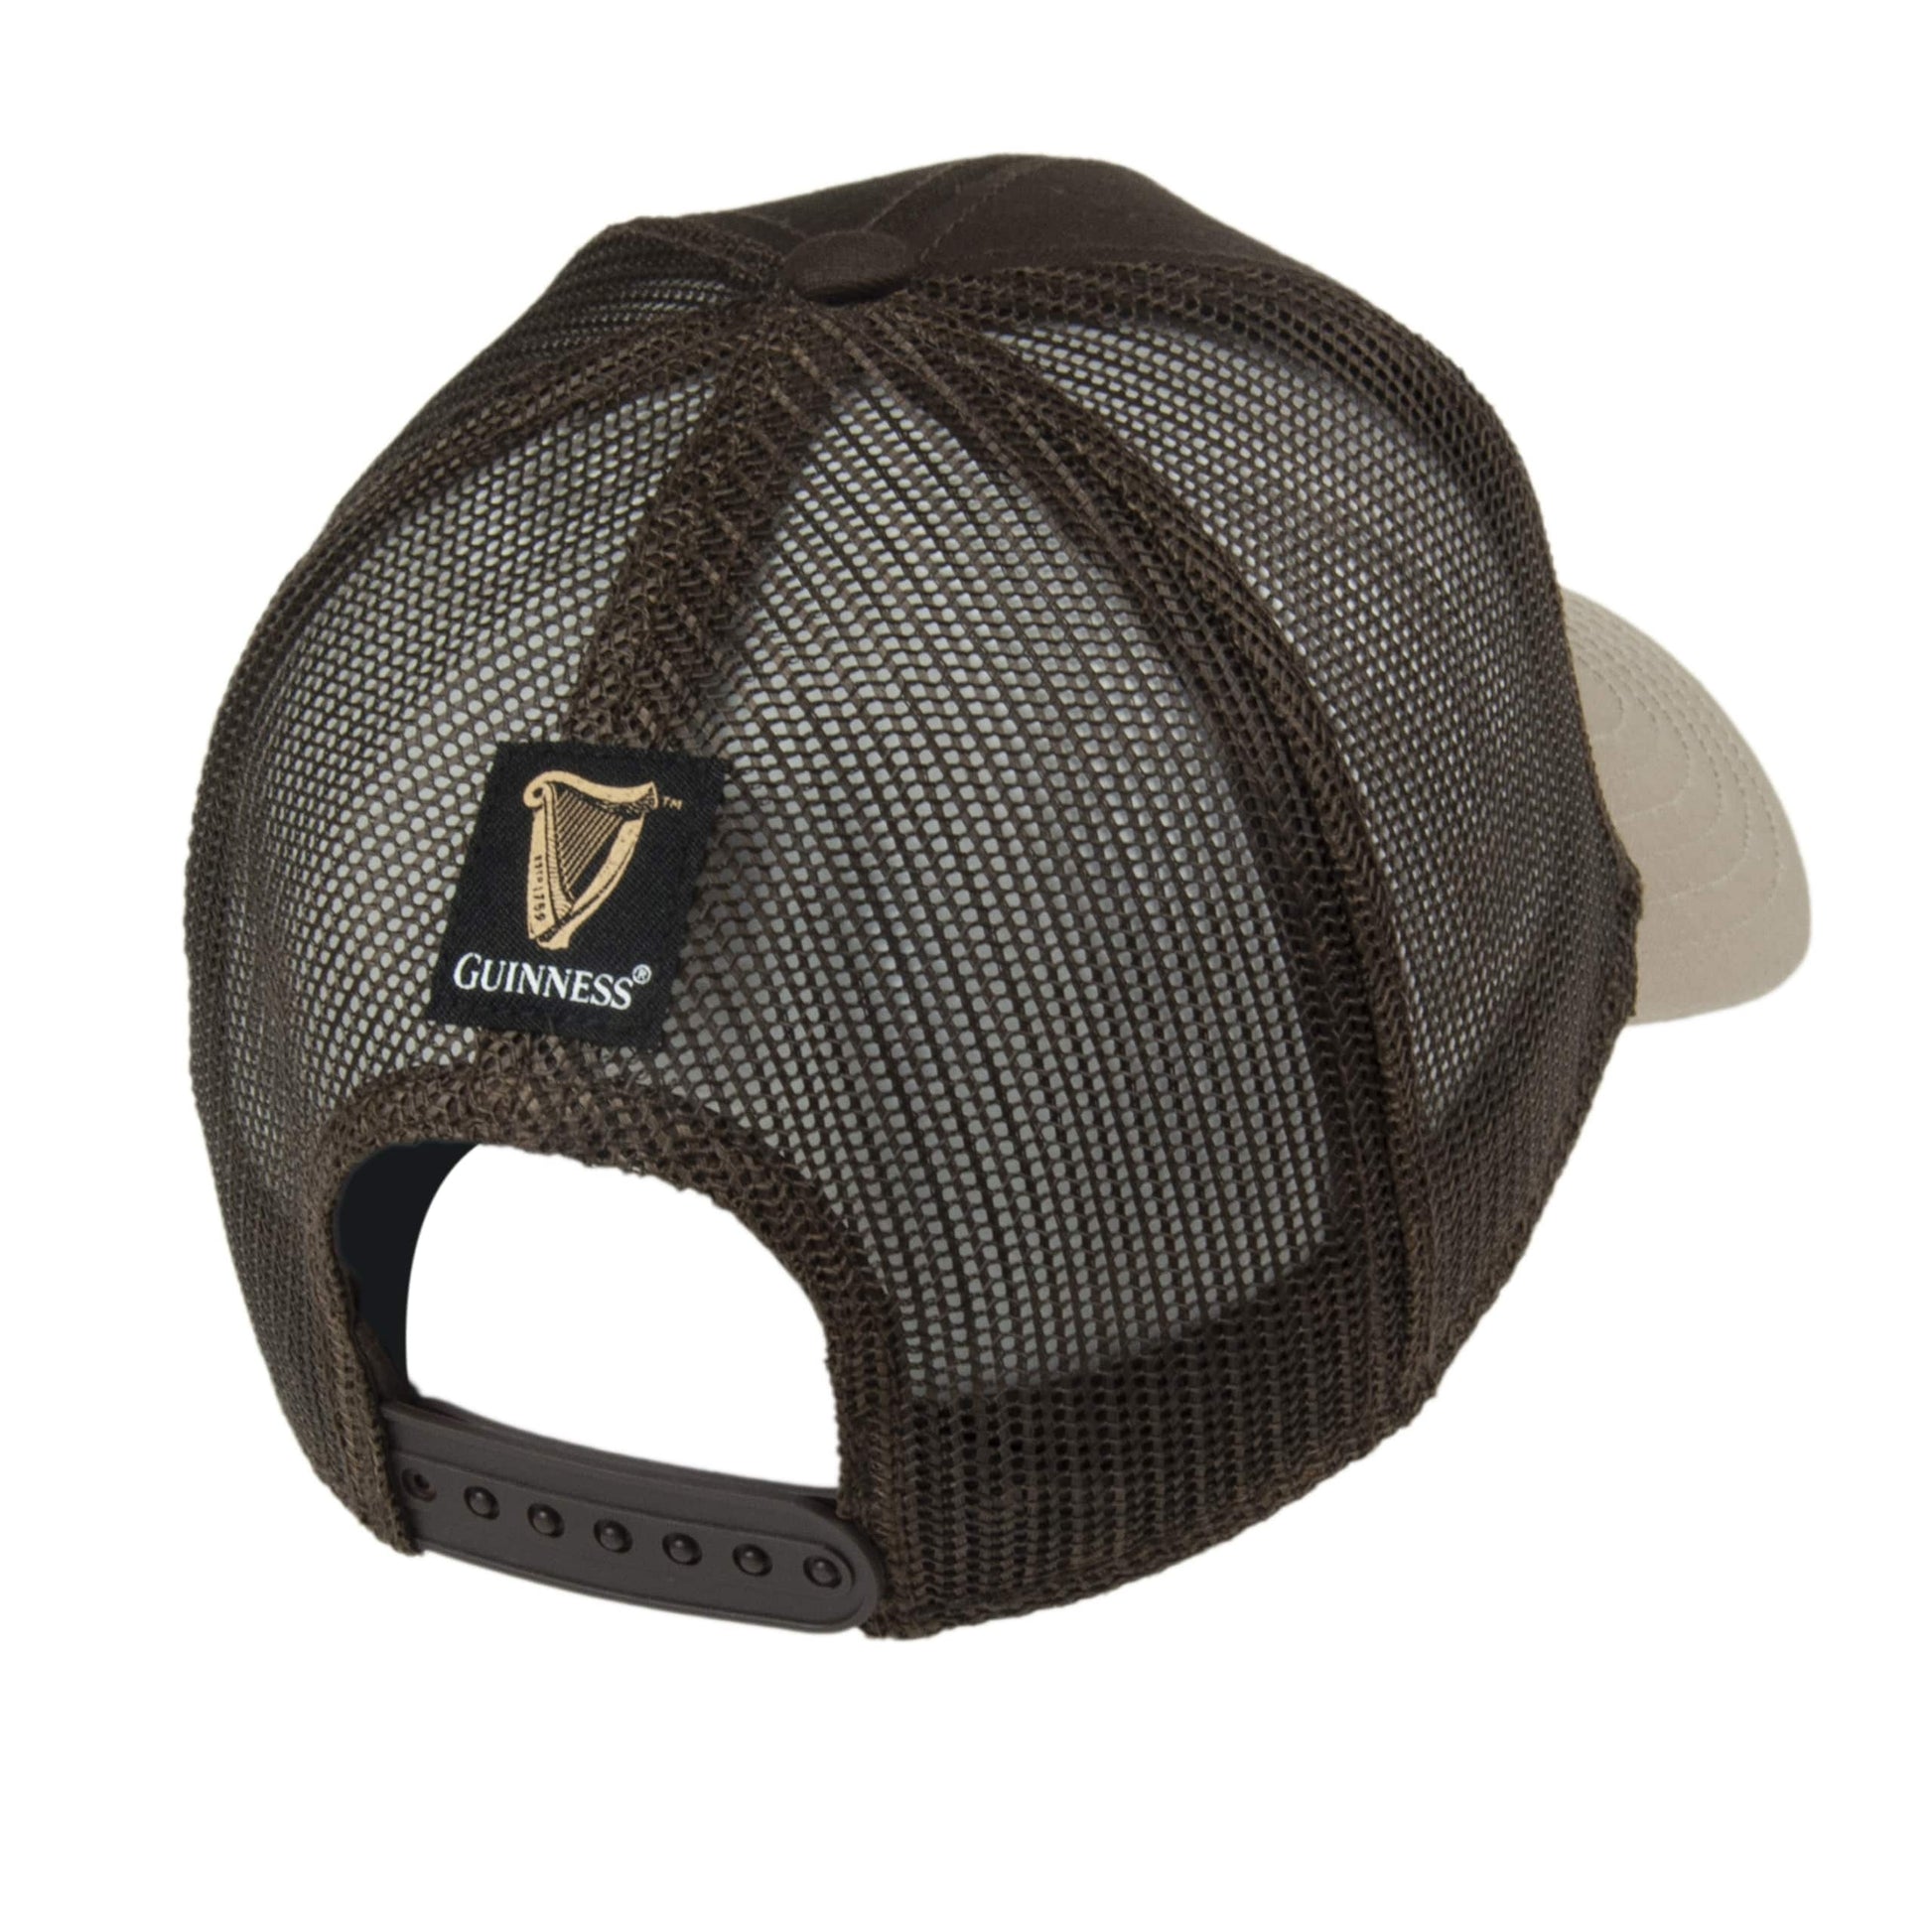 Black mesh Guinness UK Trucker Premium Brown with Embroidered Patch Cap, showcasing adjustable snapback closure and curved peak, isolated on a white background.